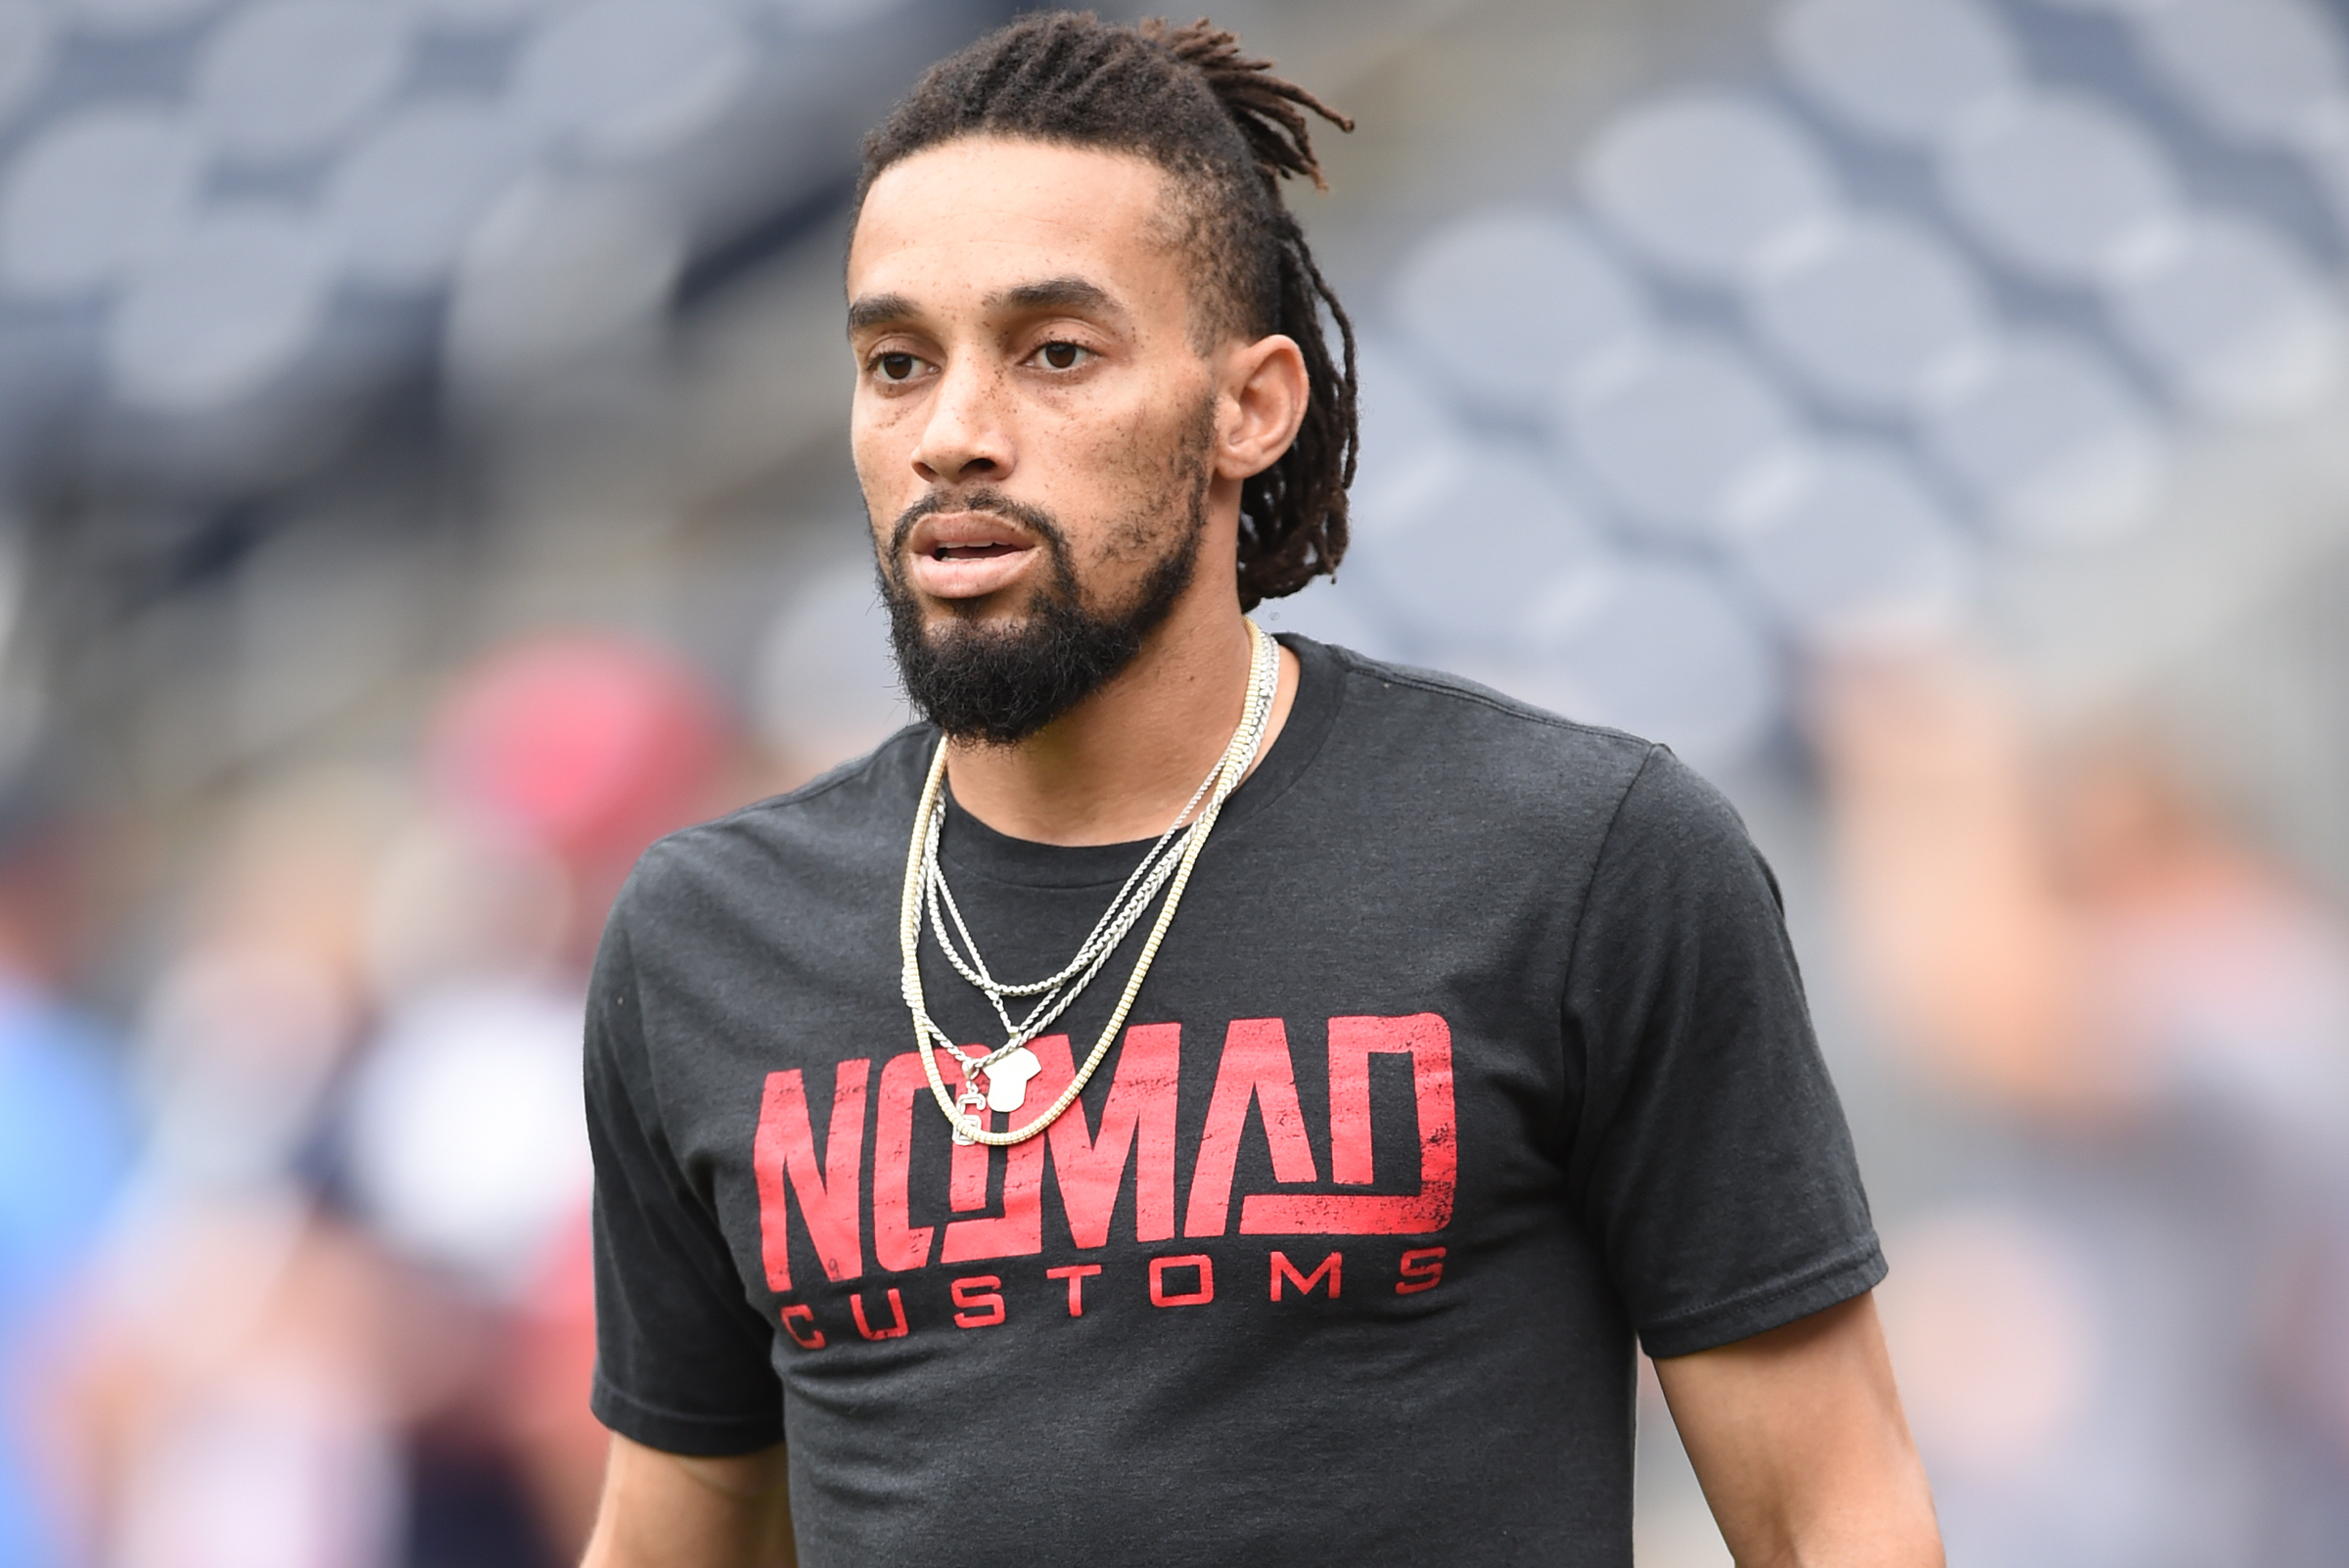 Ex-Reds, Braves OF Billy Hamilton Signs Minor-League Contract with